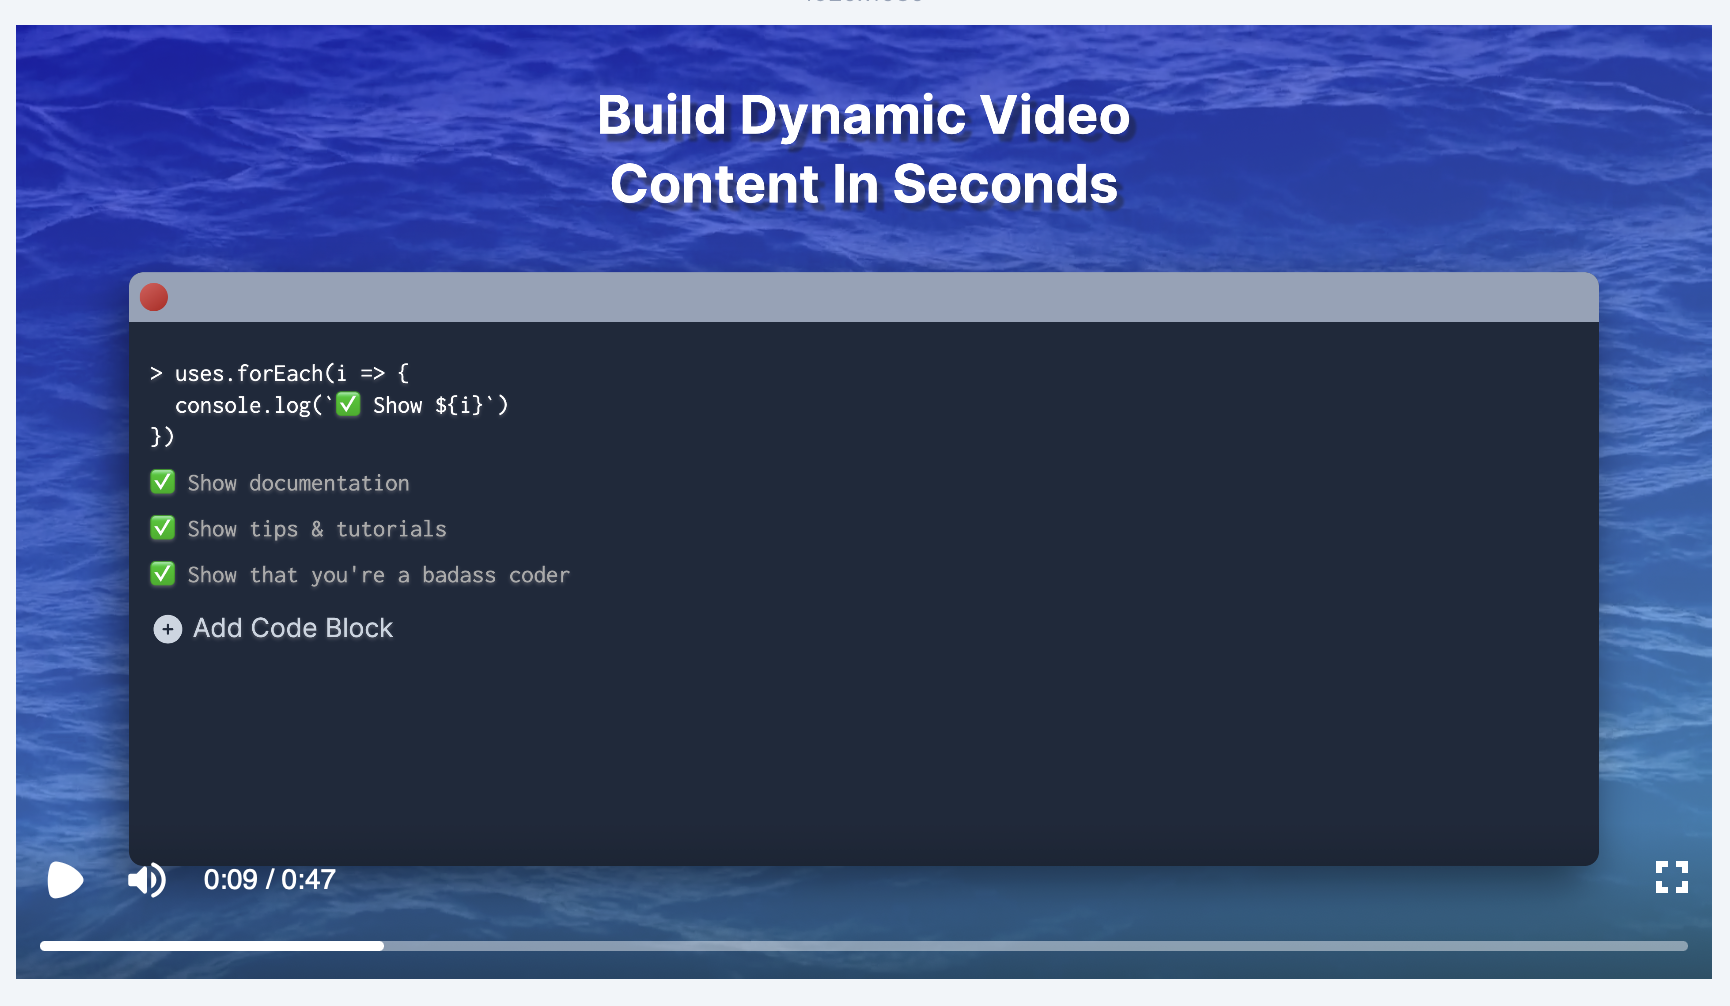 Introducing Blixtcode – Create & Share Videos of Your Code